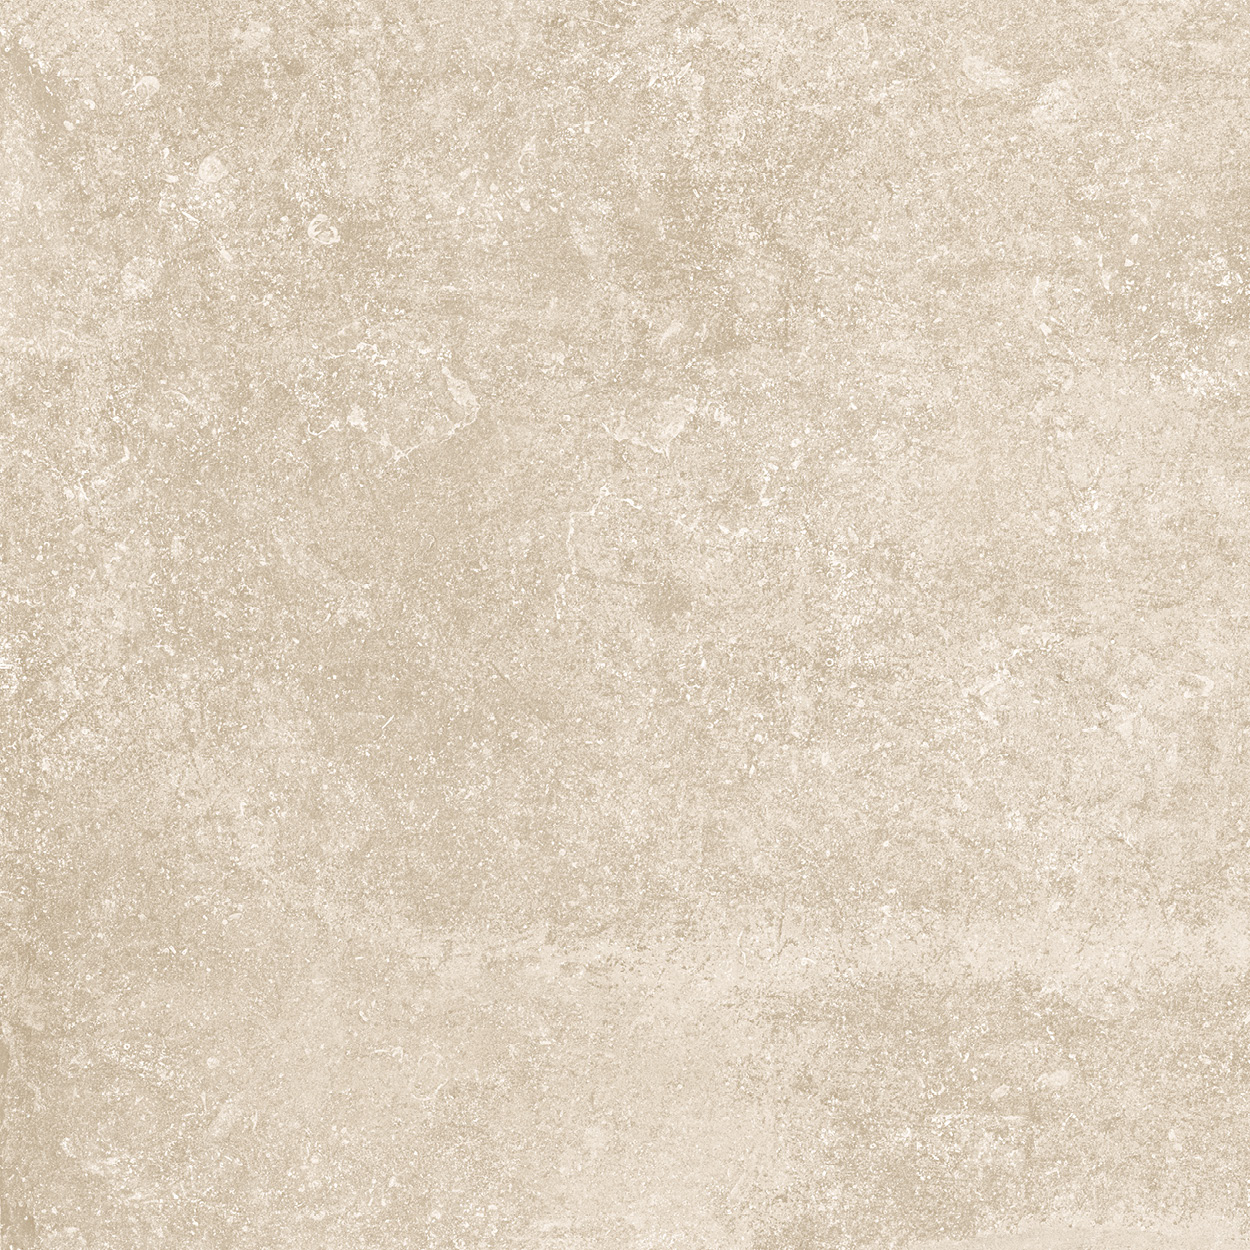 24 x 24 Marwari Clay rectified porcelain tile (SPECIAL ORDER)